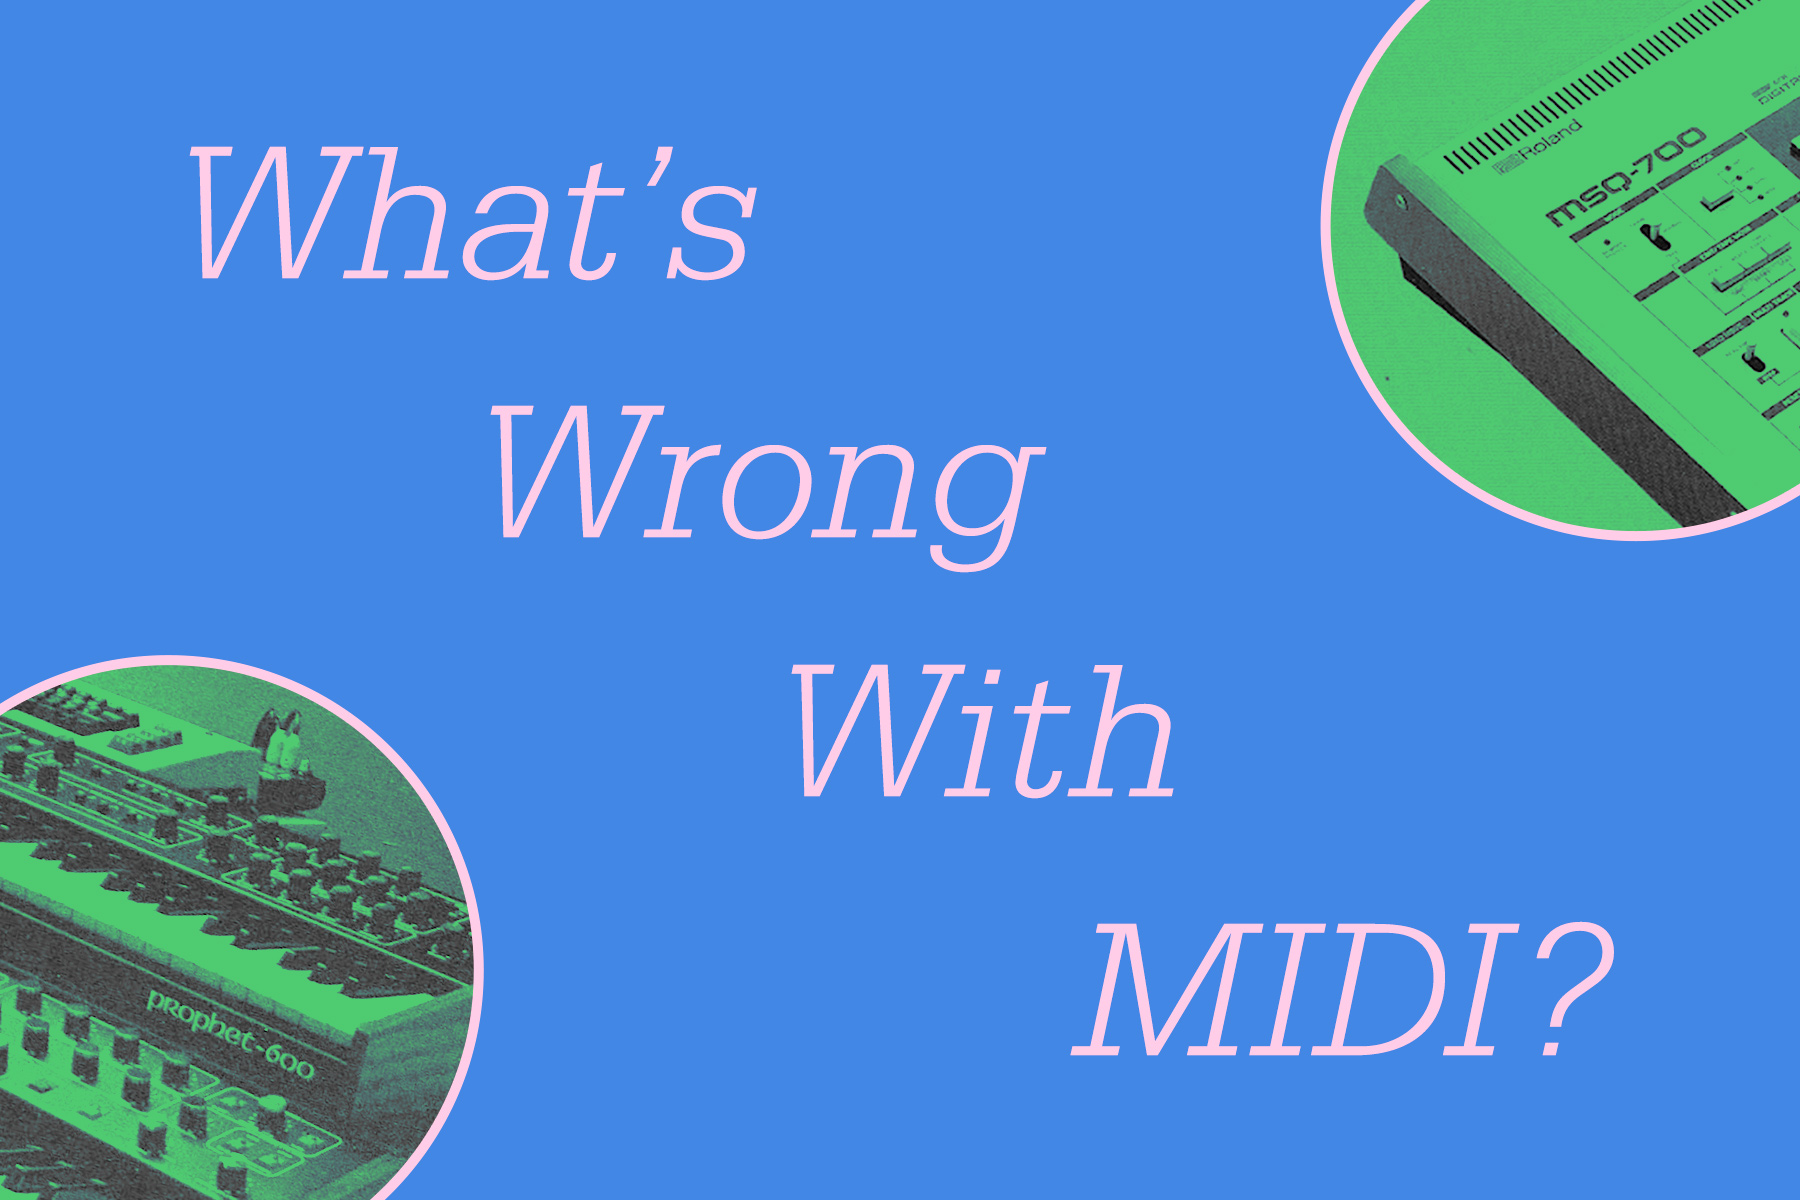 What's Wrong with MIDI?